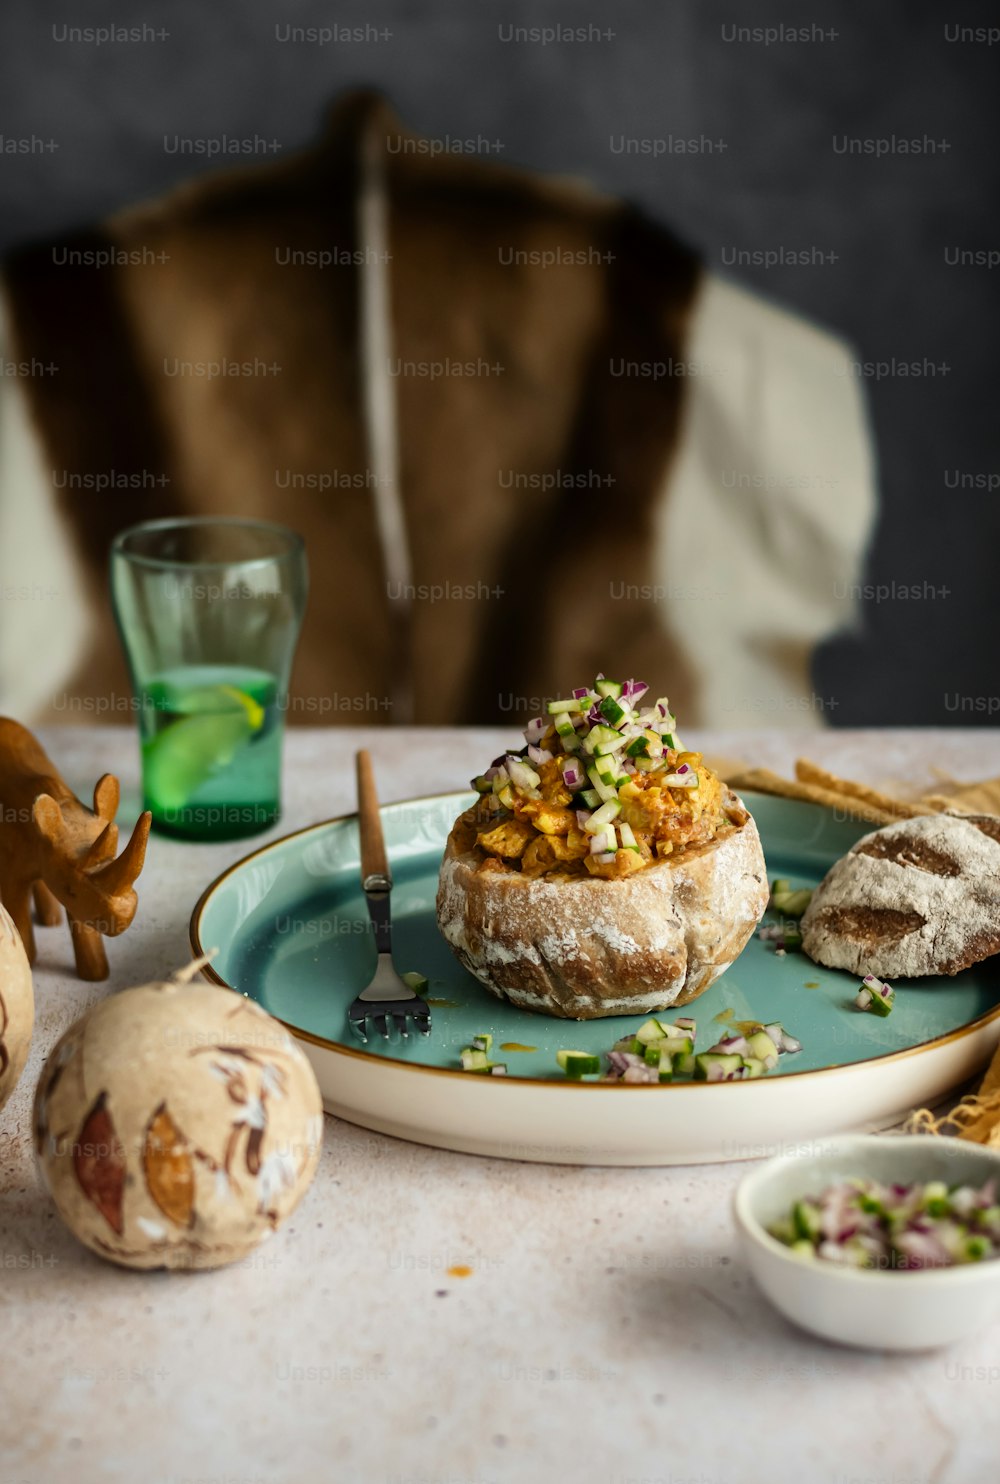 a plate of food on a table with a dog in the background